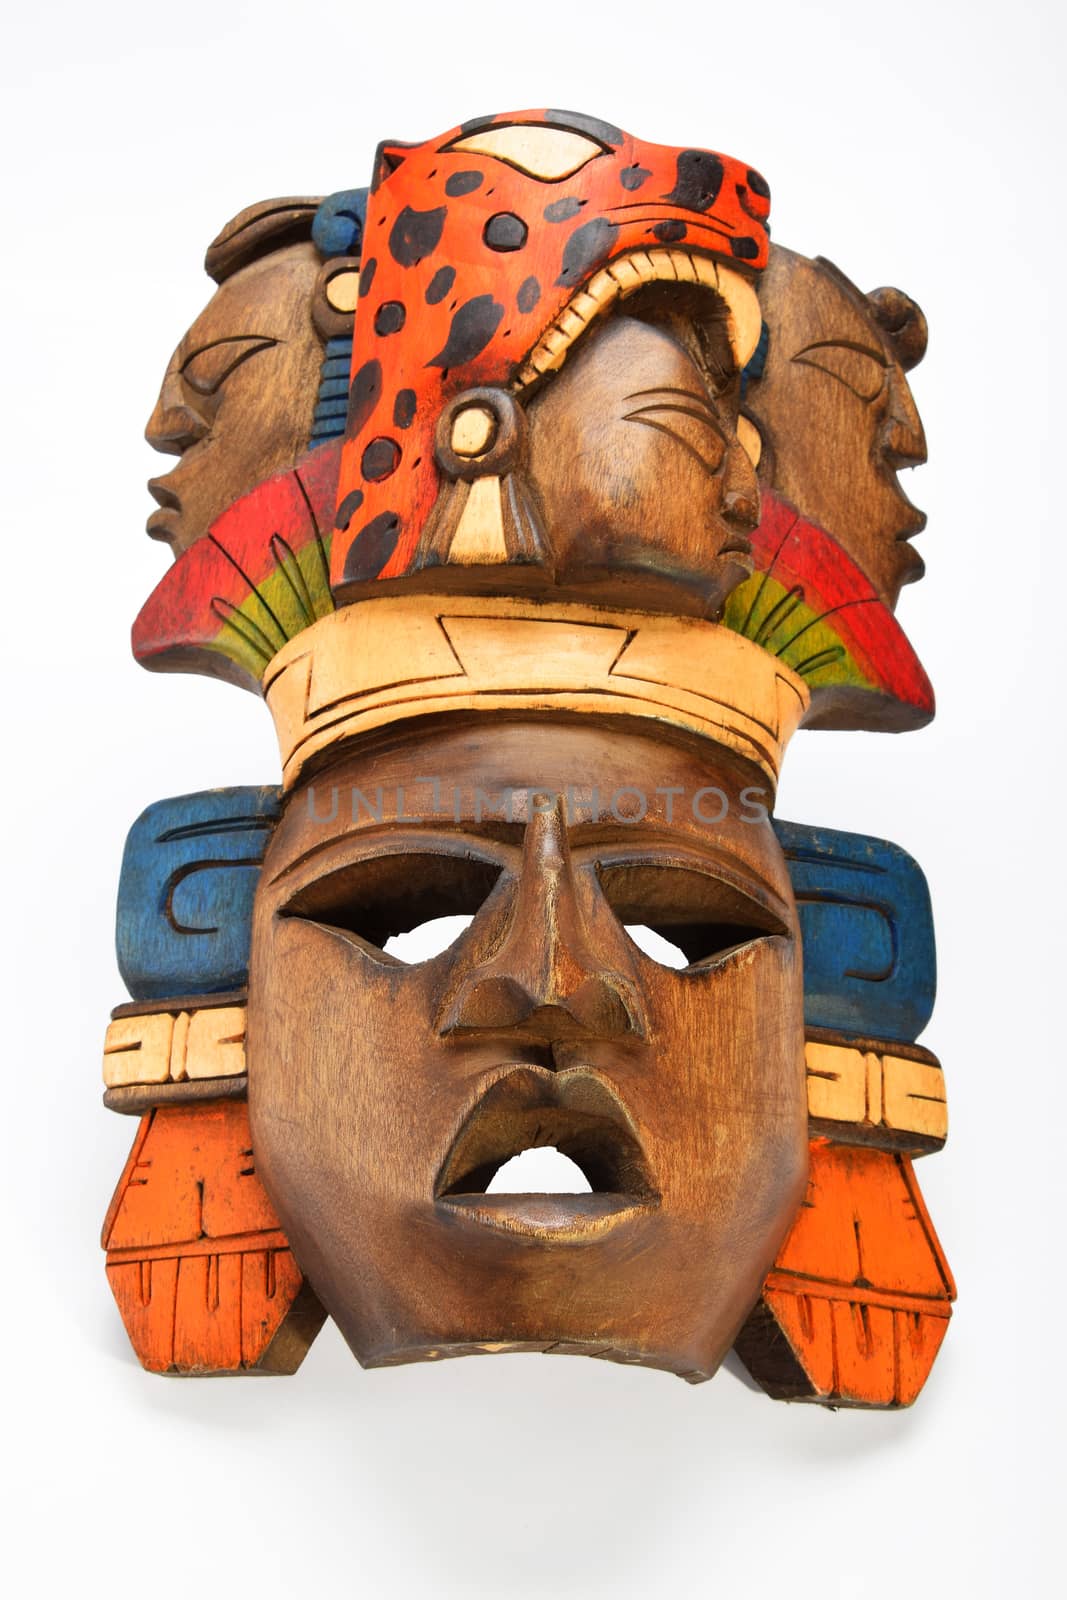 Indian Mayan Aztec wooden painted mask with roaring jaguar and human profiles isolated on white background